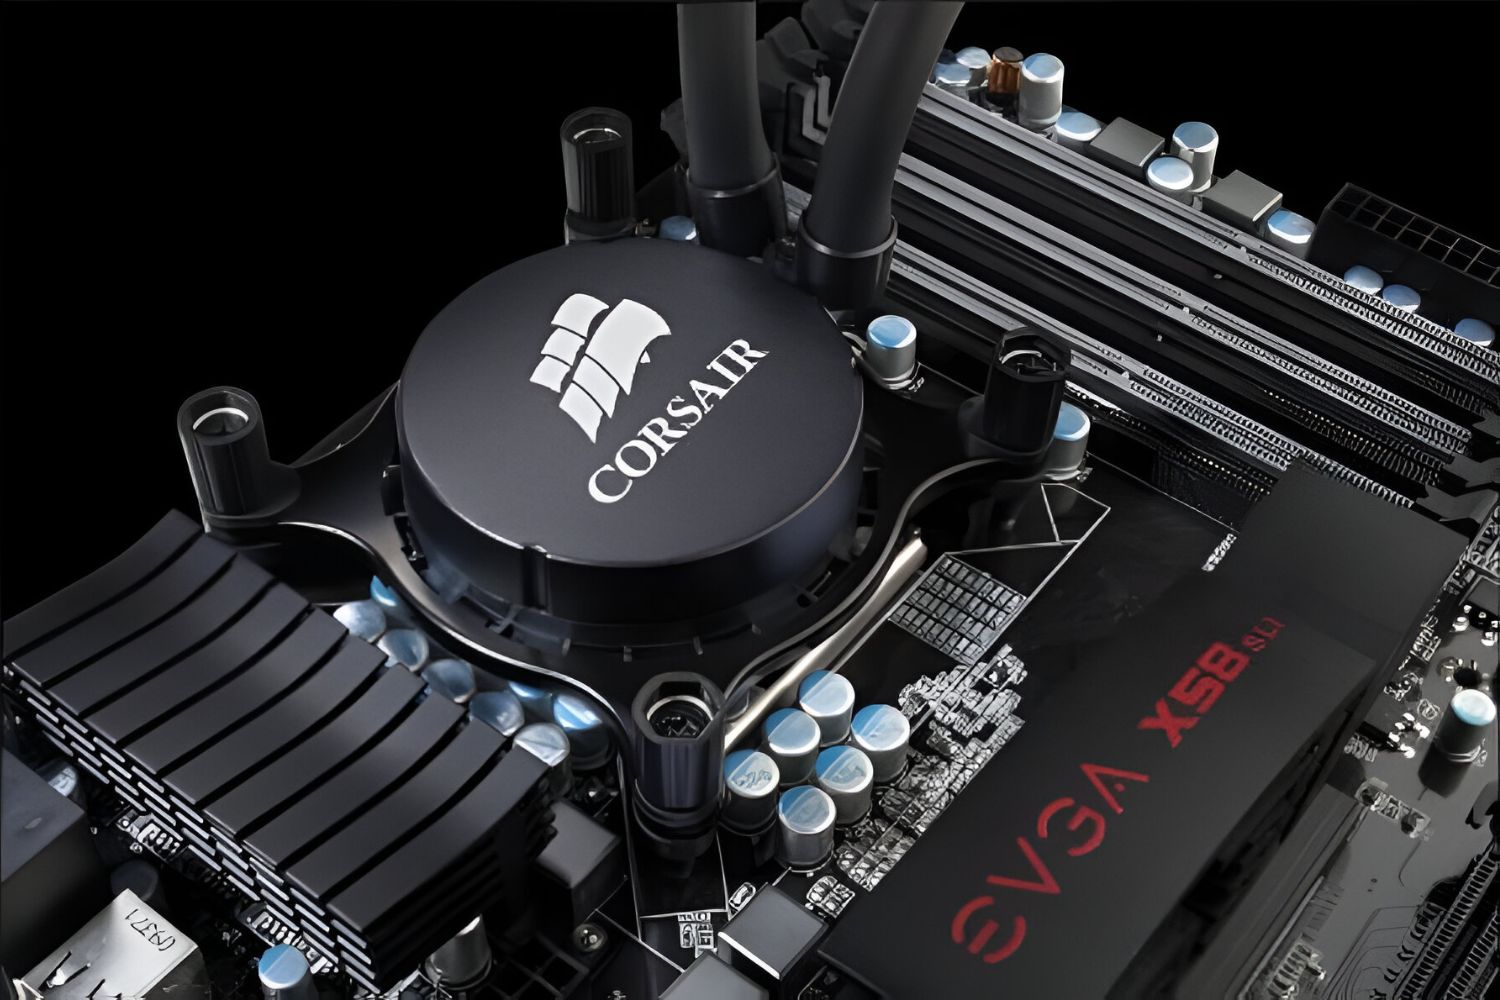 How To Attach The Corsair Hydro Series H55 Quiet Edition Water / Liquid CPU Cooler 120Mm